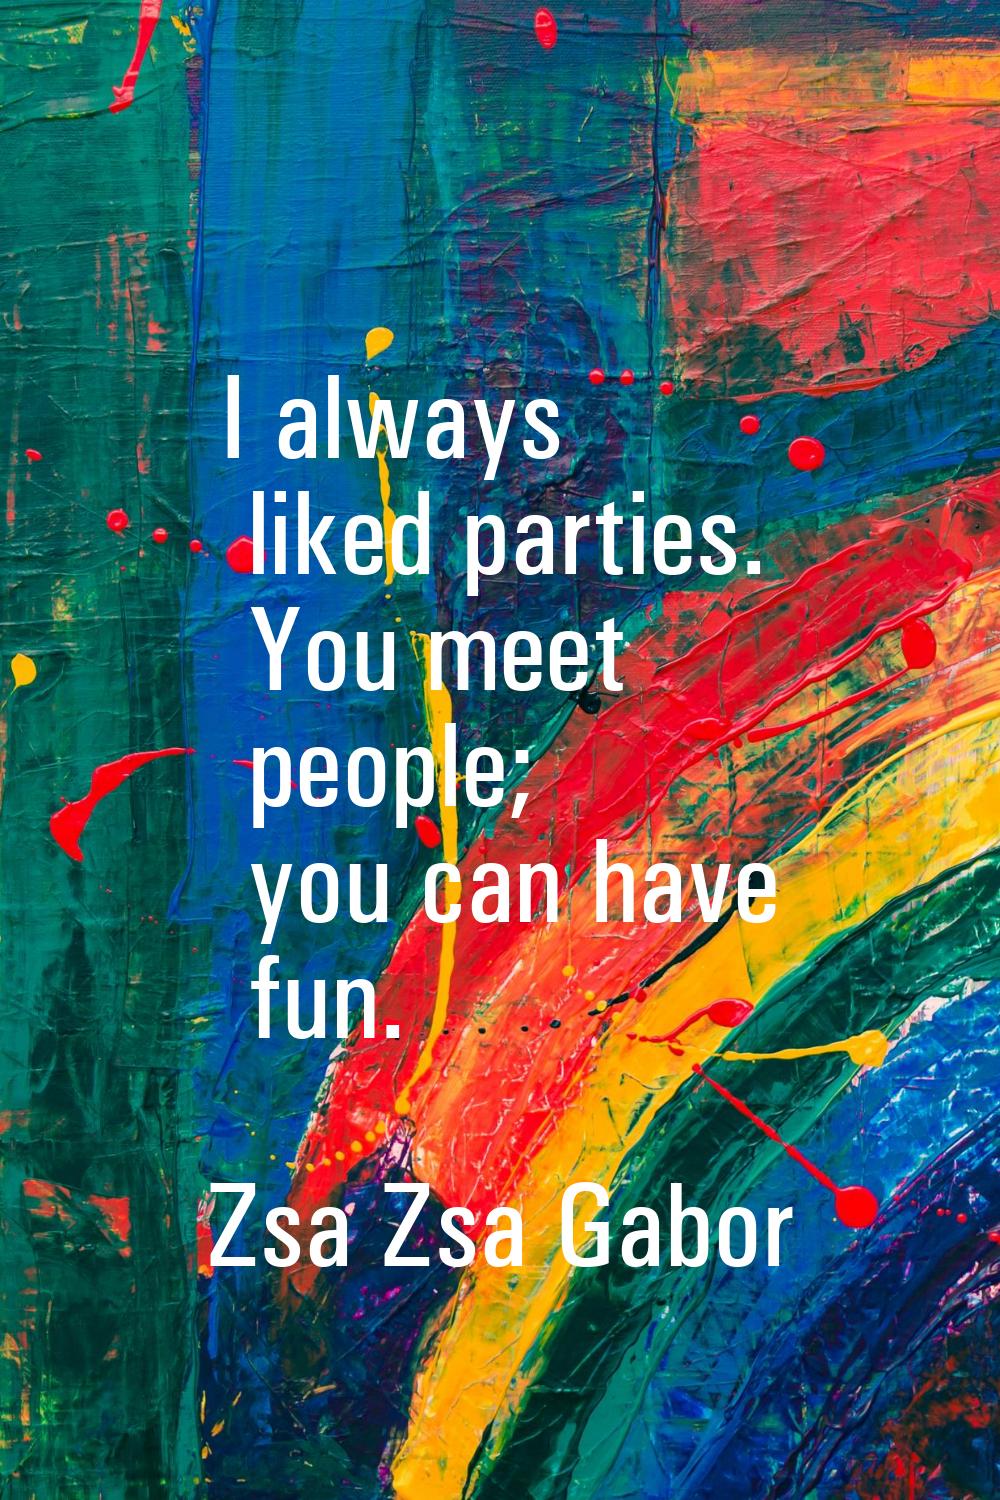 I always liked parties. You meet people; you can have fun.